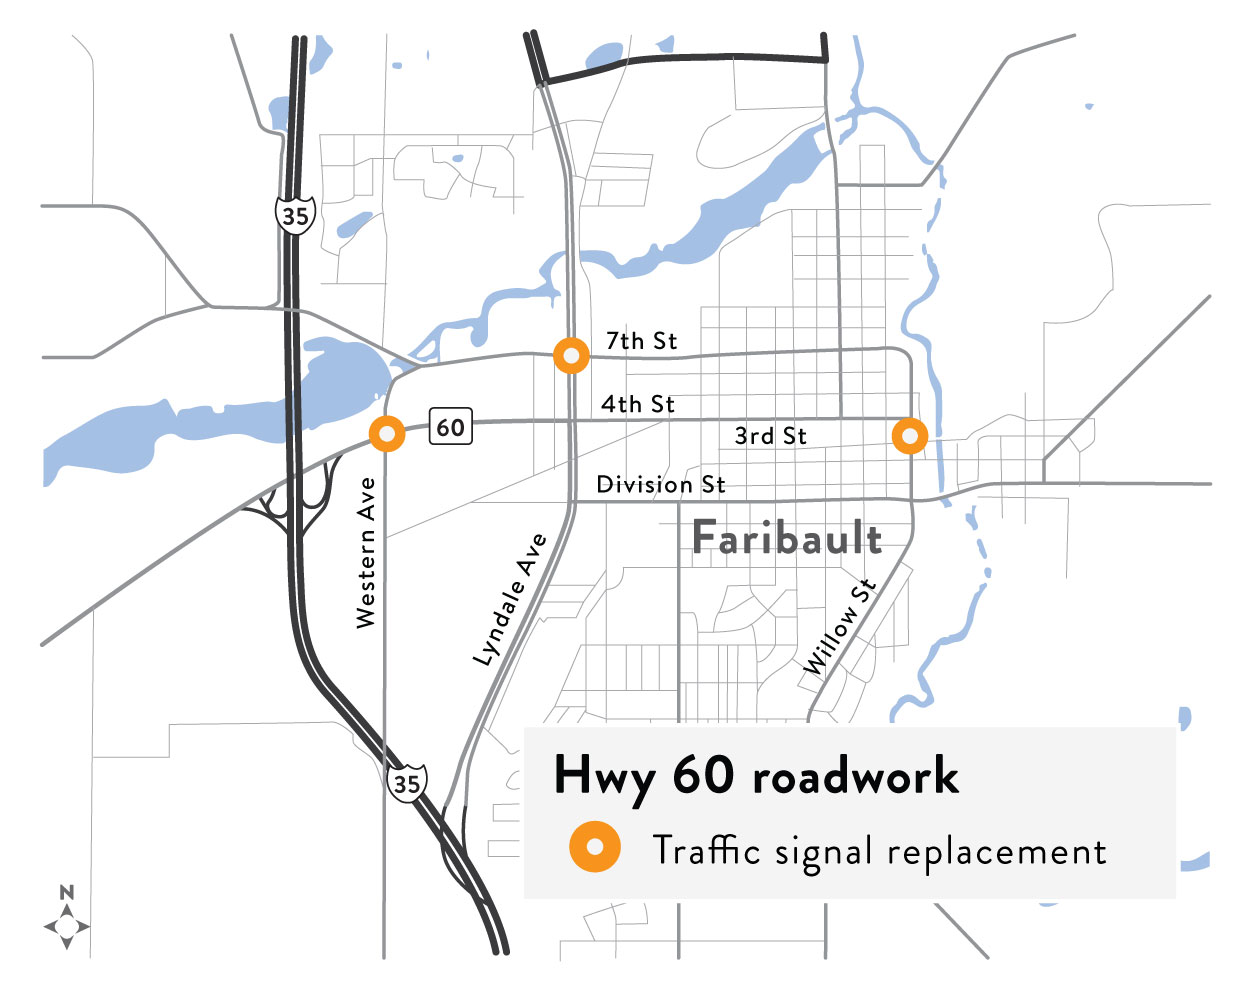 Location of signal replacements in Faribault